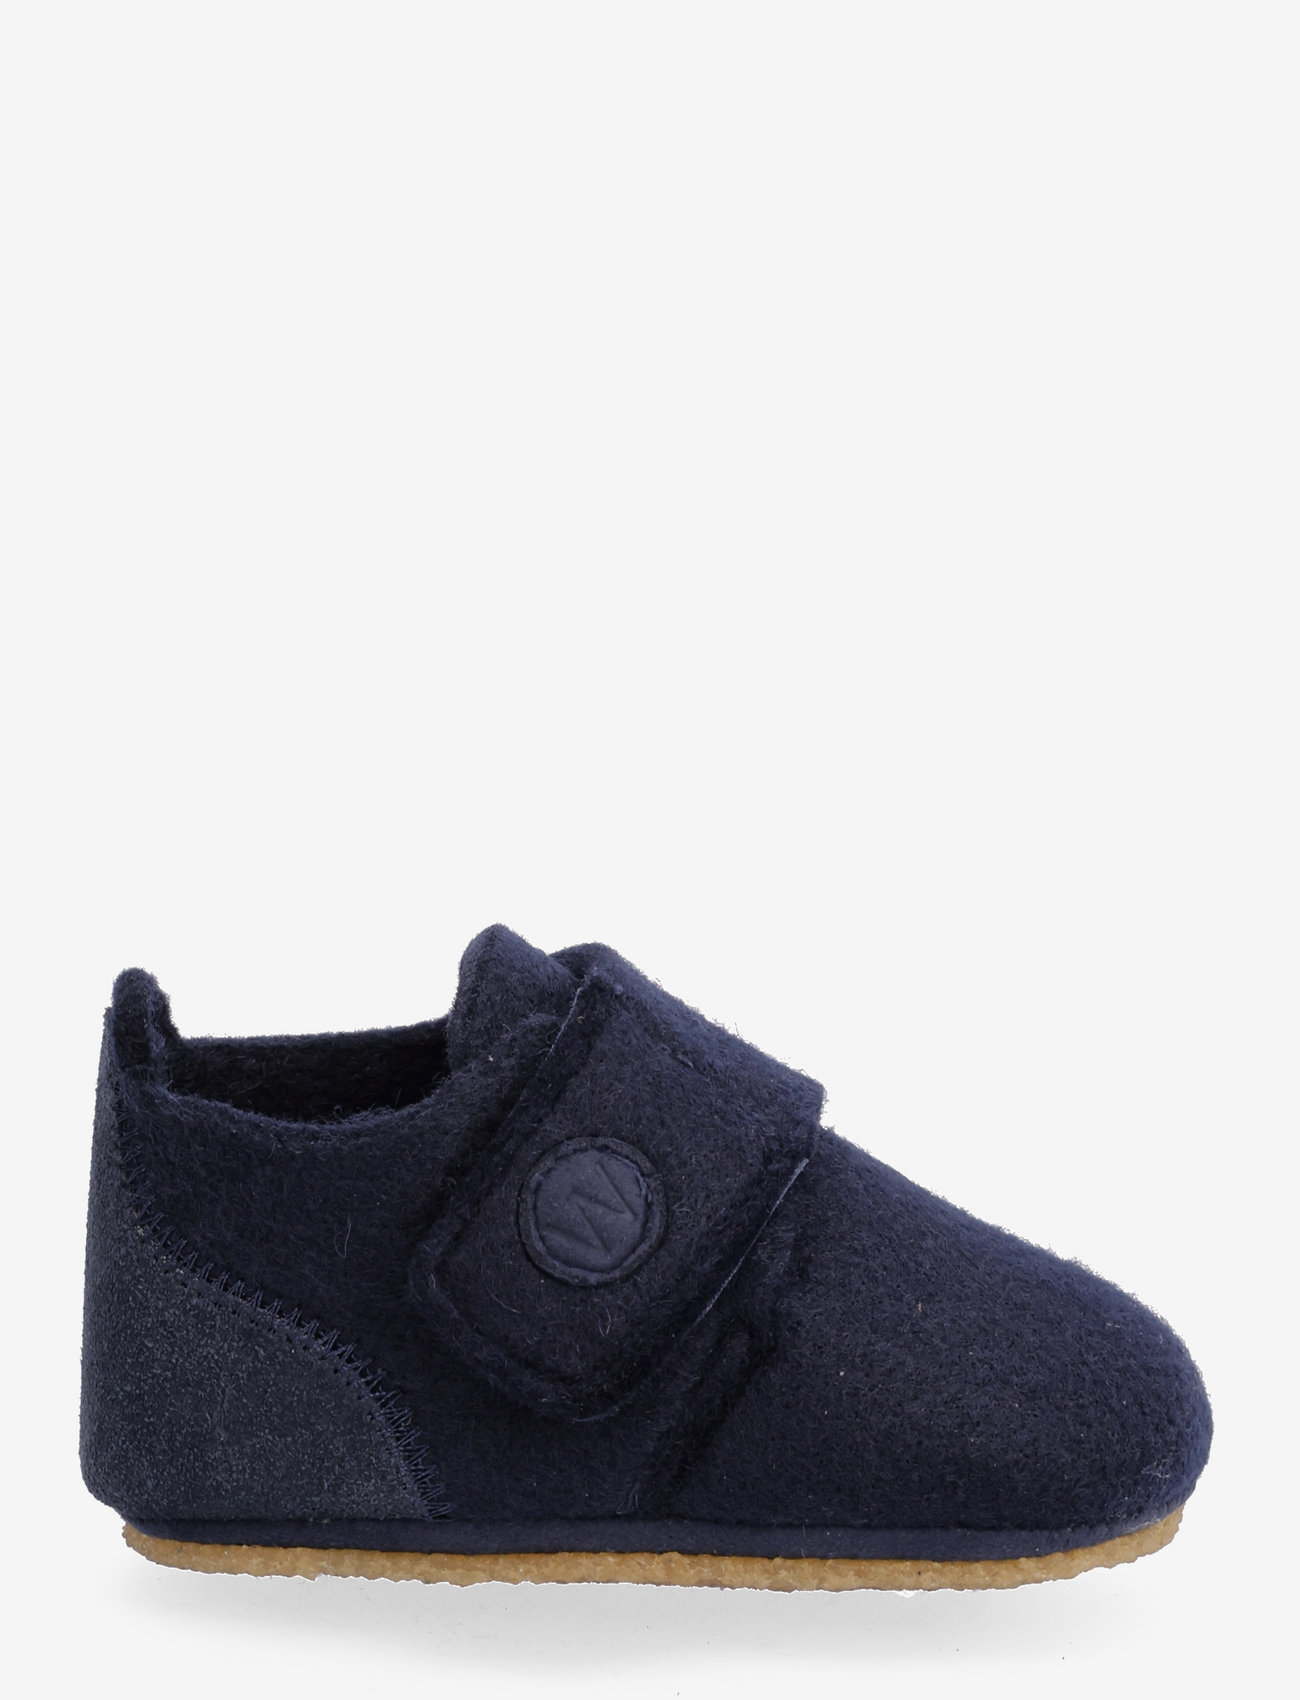 Wheat - Marlin Felt Home Shoe - lowest prices - navy - 1